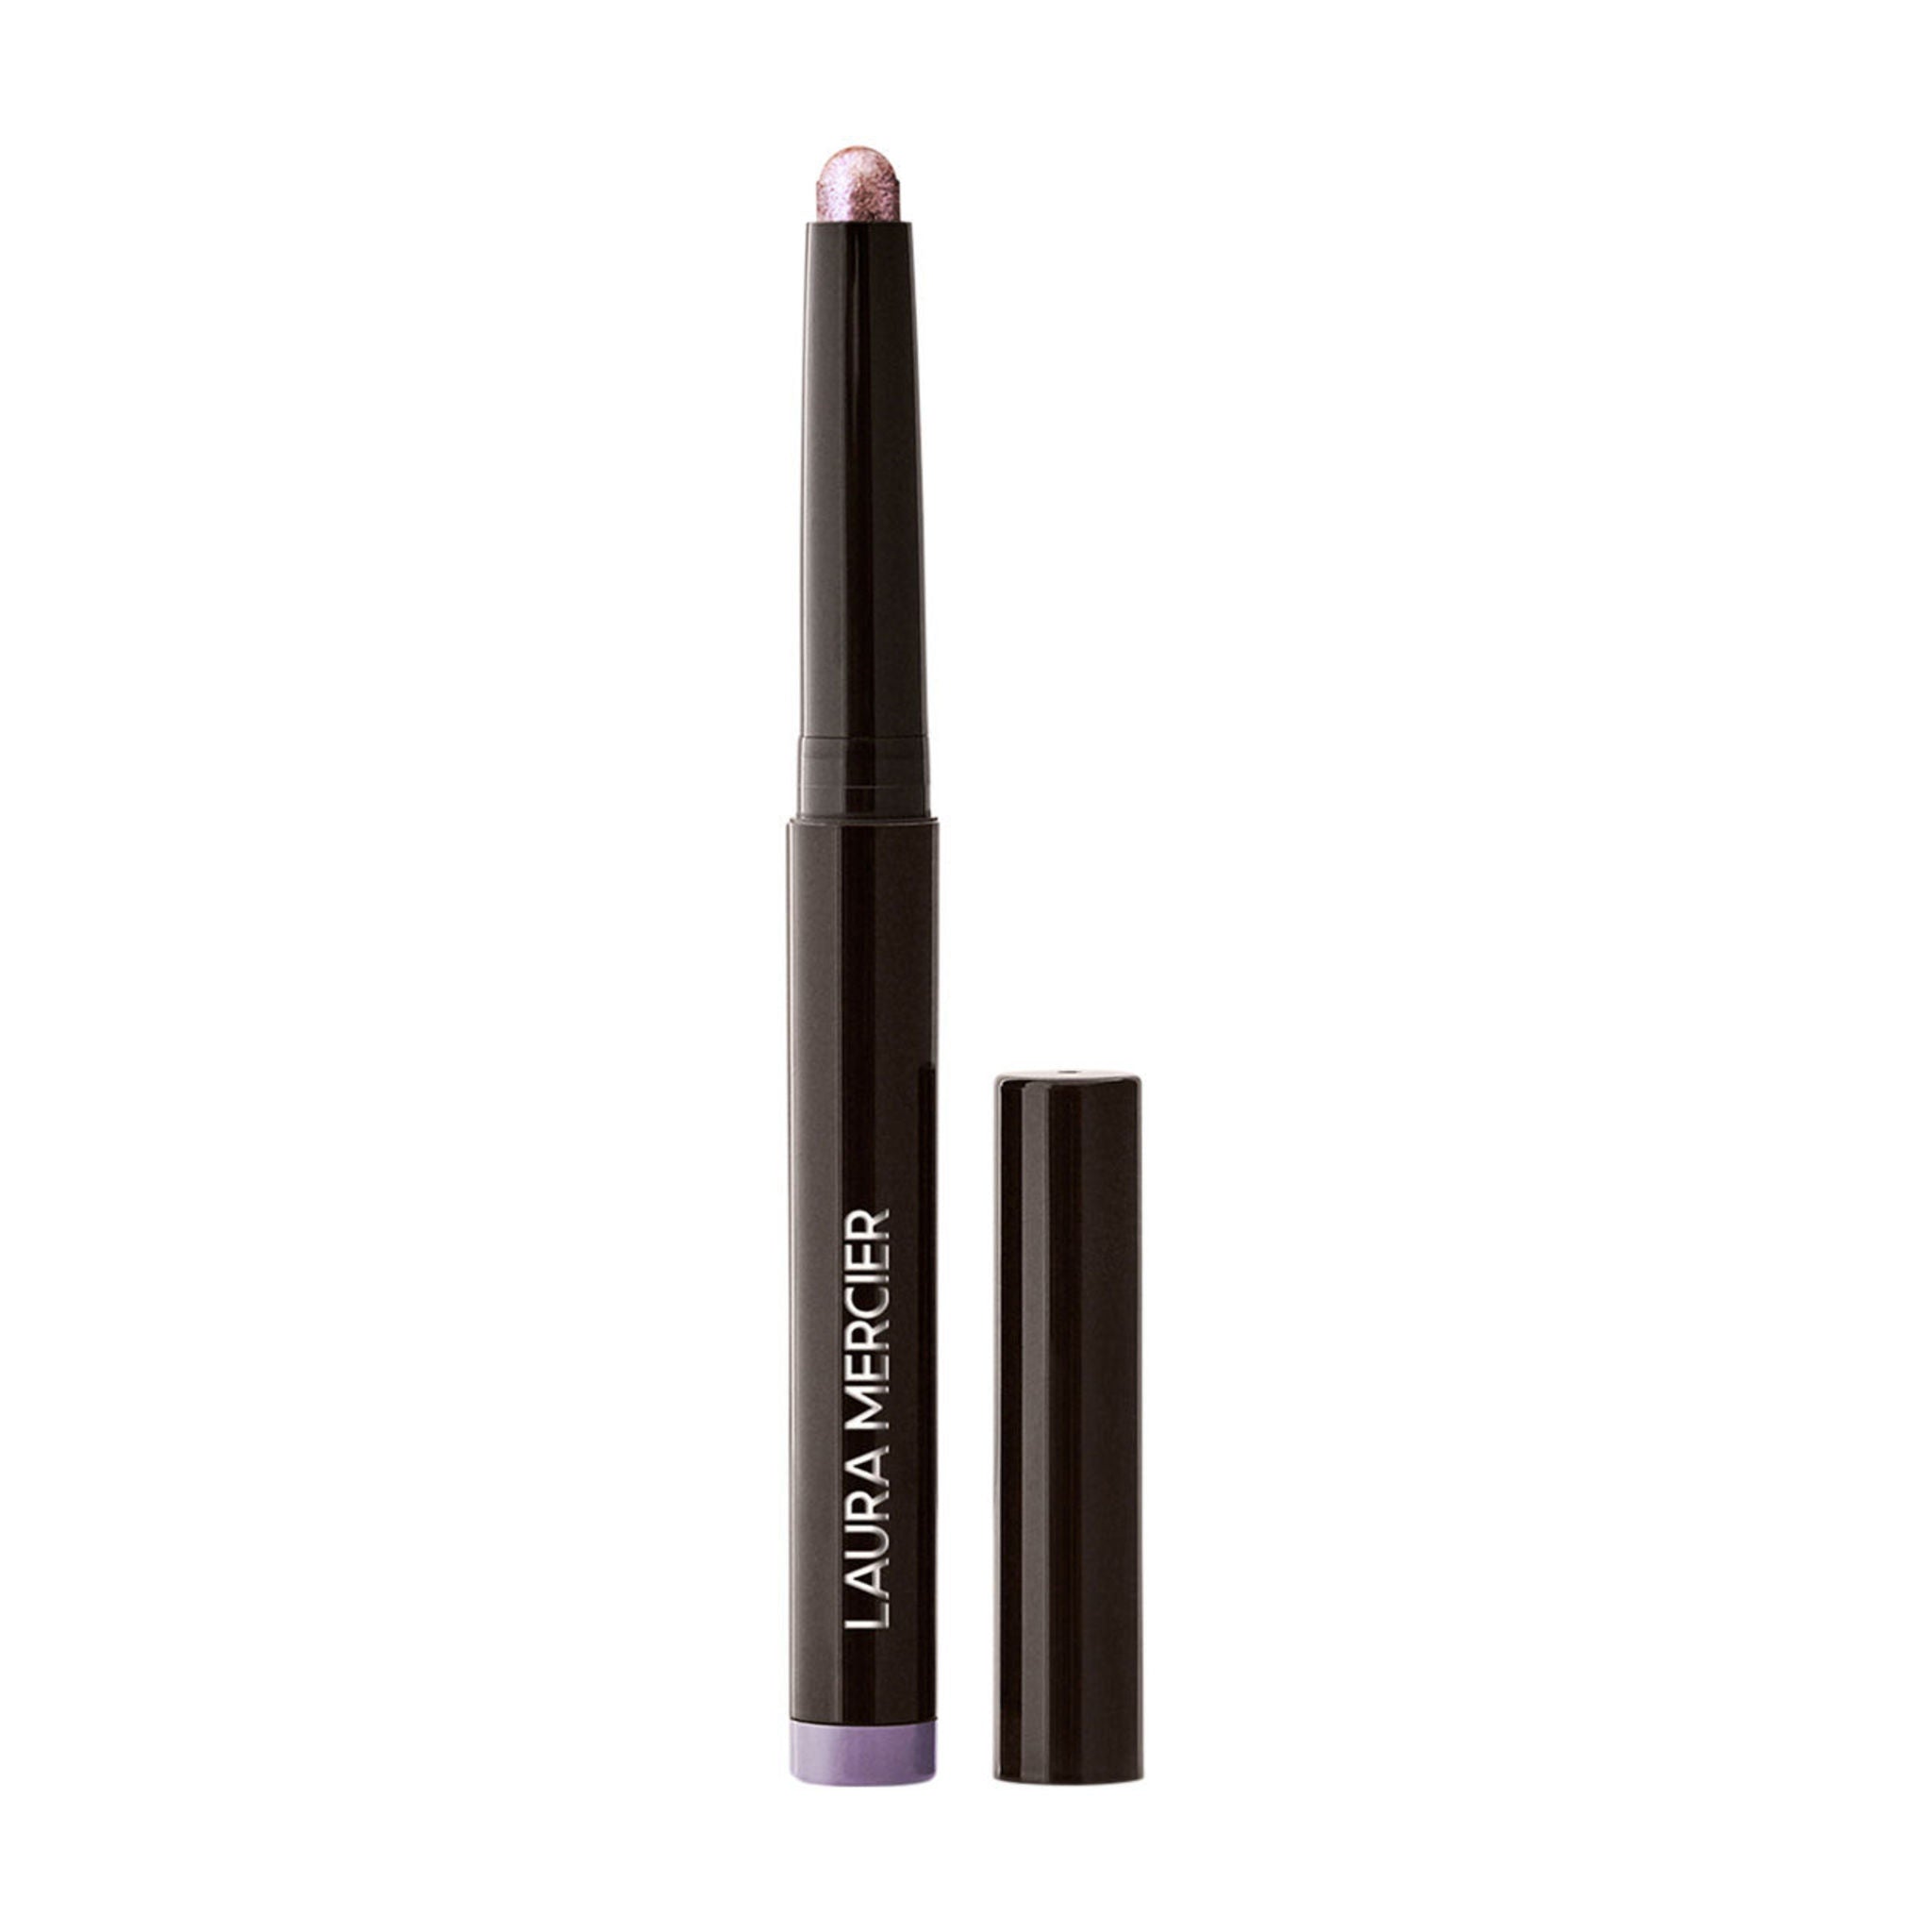 Laura Mercier Caviar Stick Eye Colour Color/Shade variant: Intense Amethyst main image. This product is in the color purple